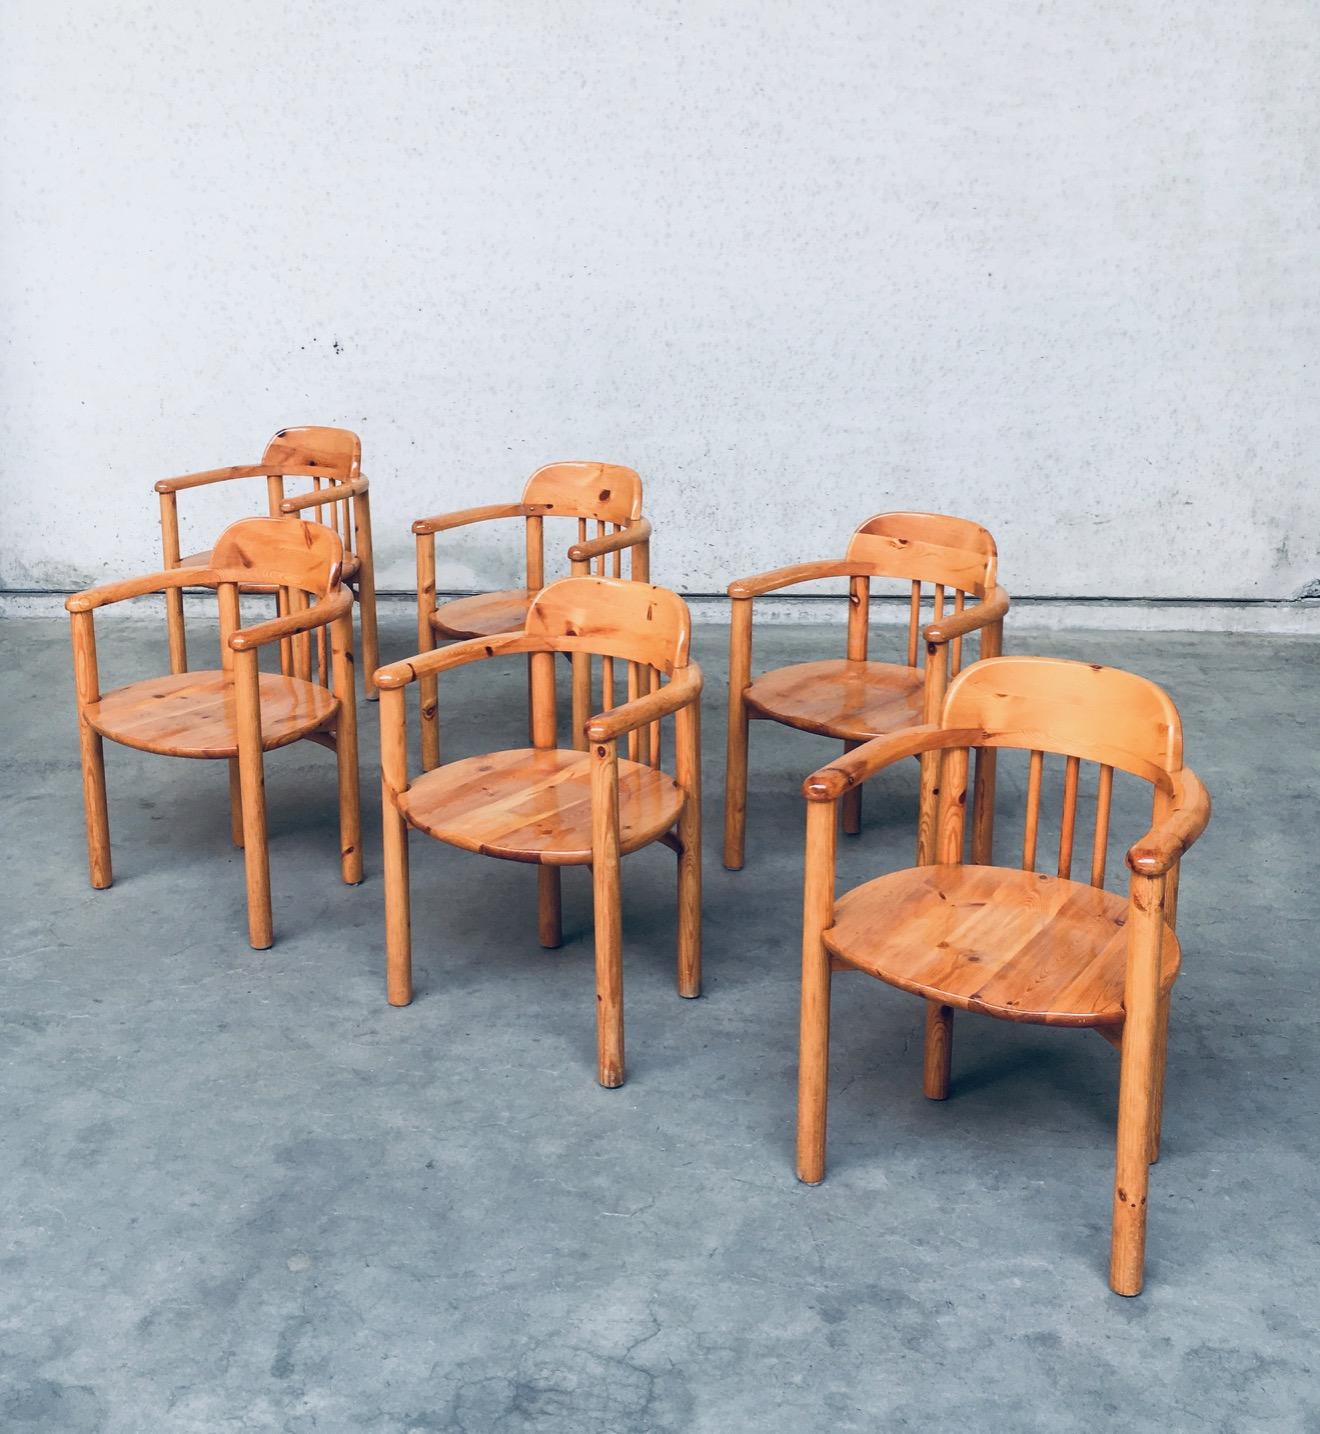 Vintage Mid-Century Modern Scandinavian Design Pine dining chair set. Designed by Rainer Daumiller for Hirtshals Savvaerk, made in Denmark 1970's. Solid pine constructed chairs. Chairs are in good condition. 2 have had some repairs at the backrest,